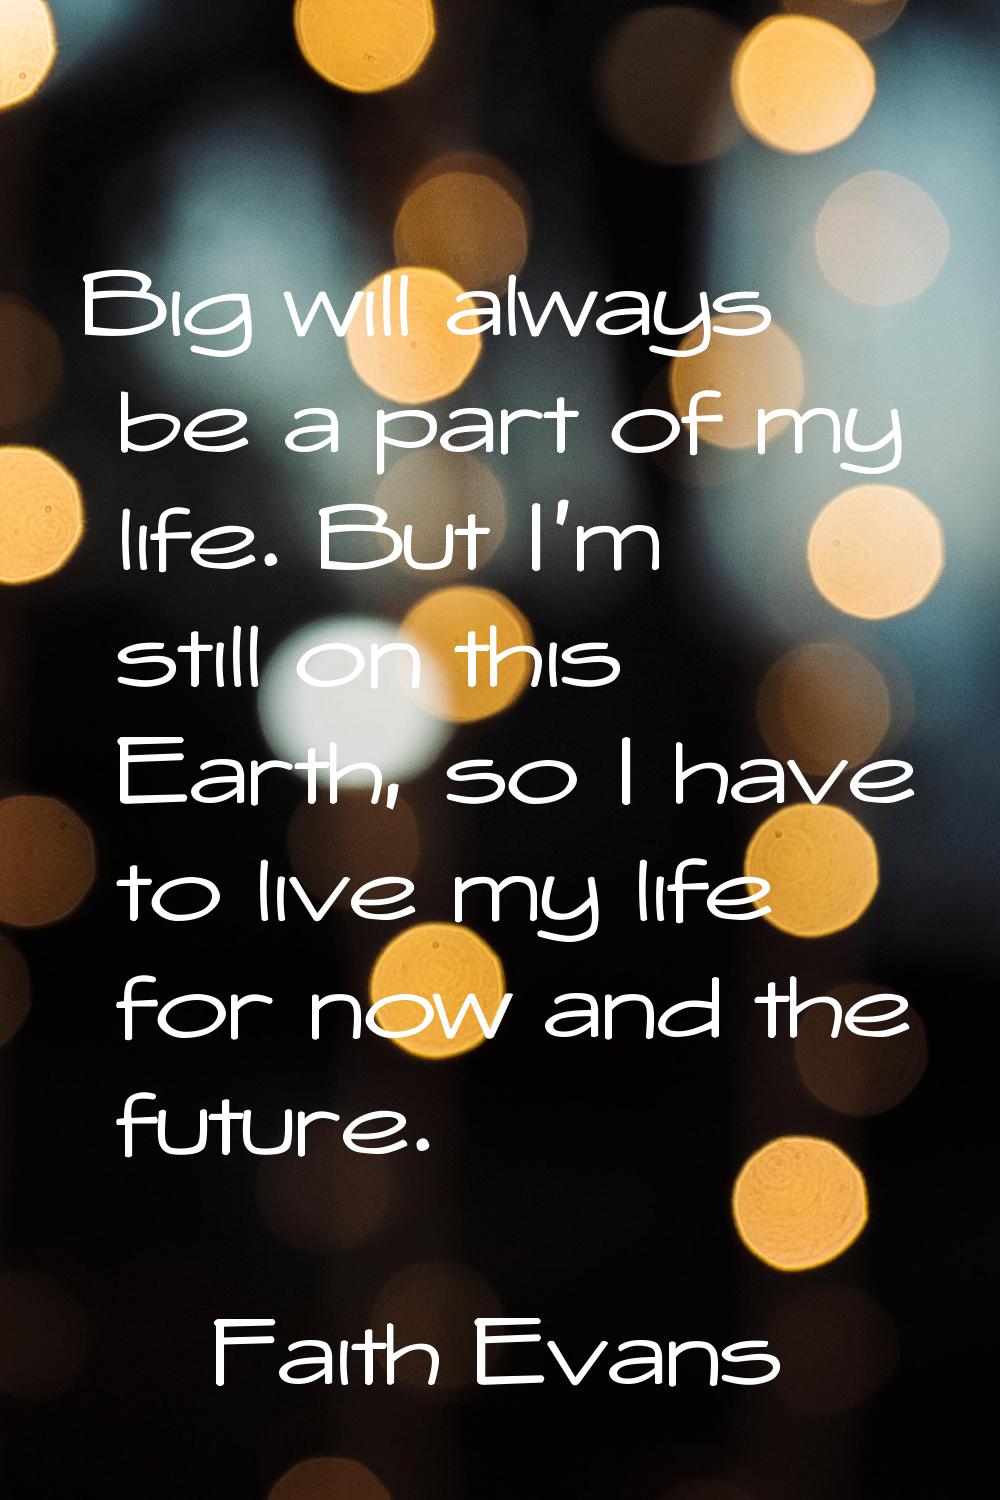 Big will always be a part of my life. But I'm still on this Earth, so I have to live my life for no